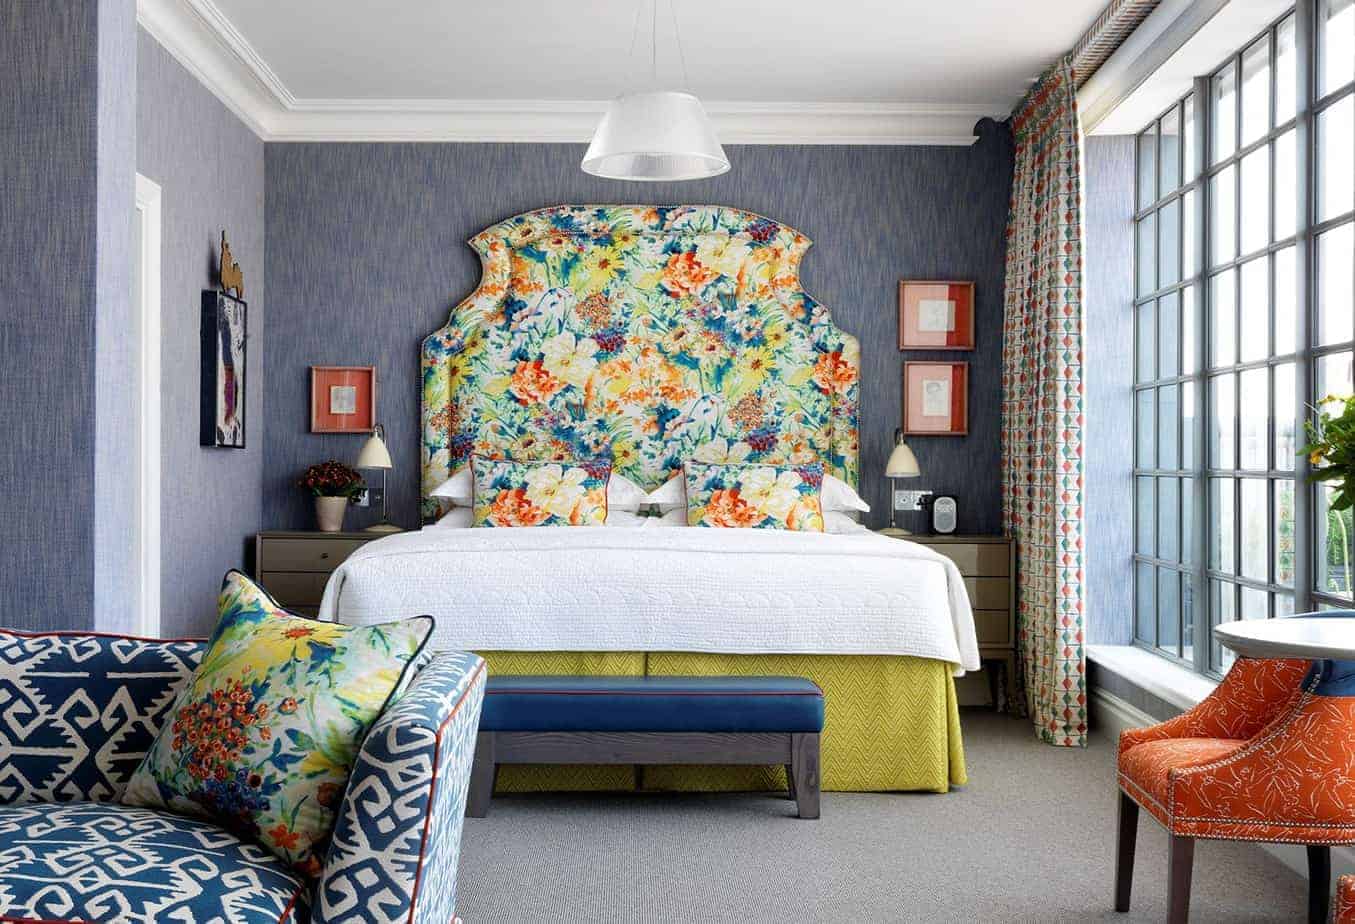 Flowered boutique hotel in the heart of London